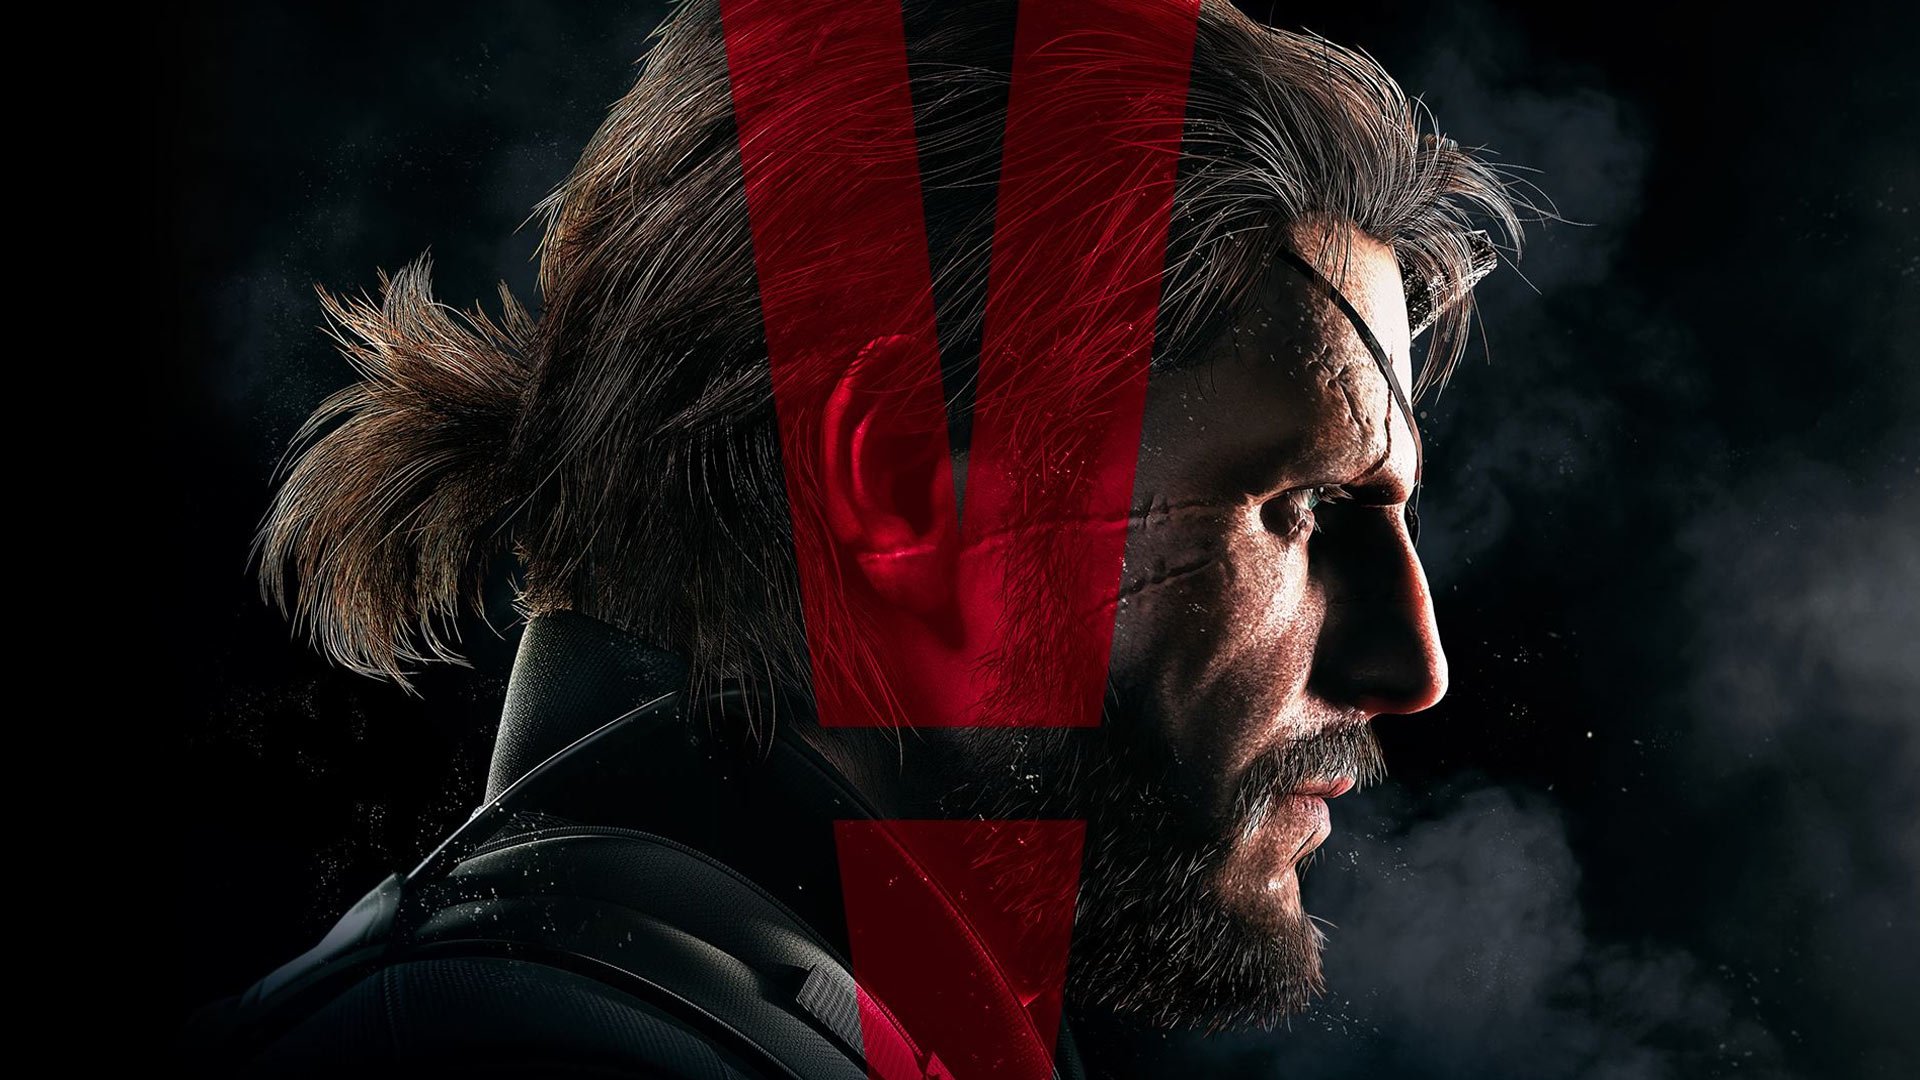 Metal Gear Solid V: The Phantom Pain Wallpapers